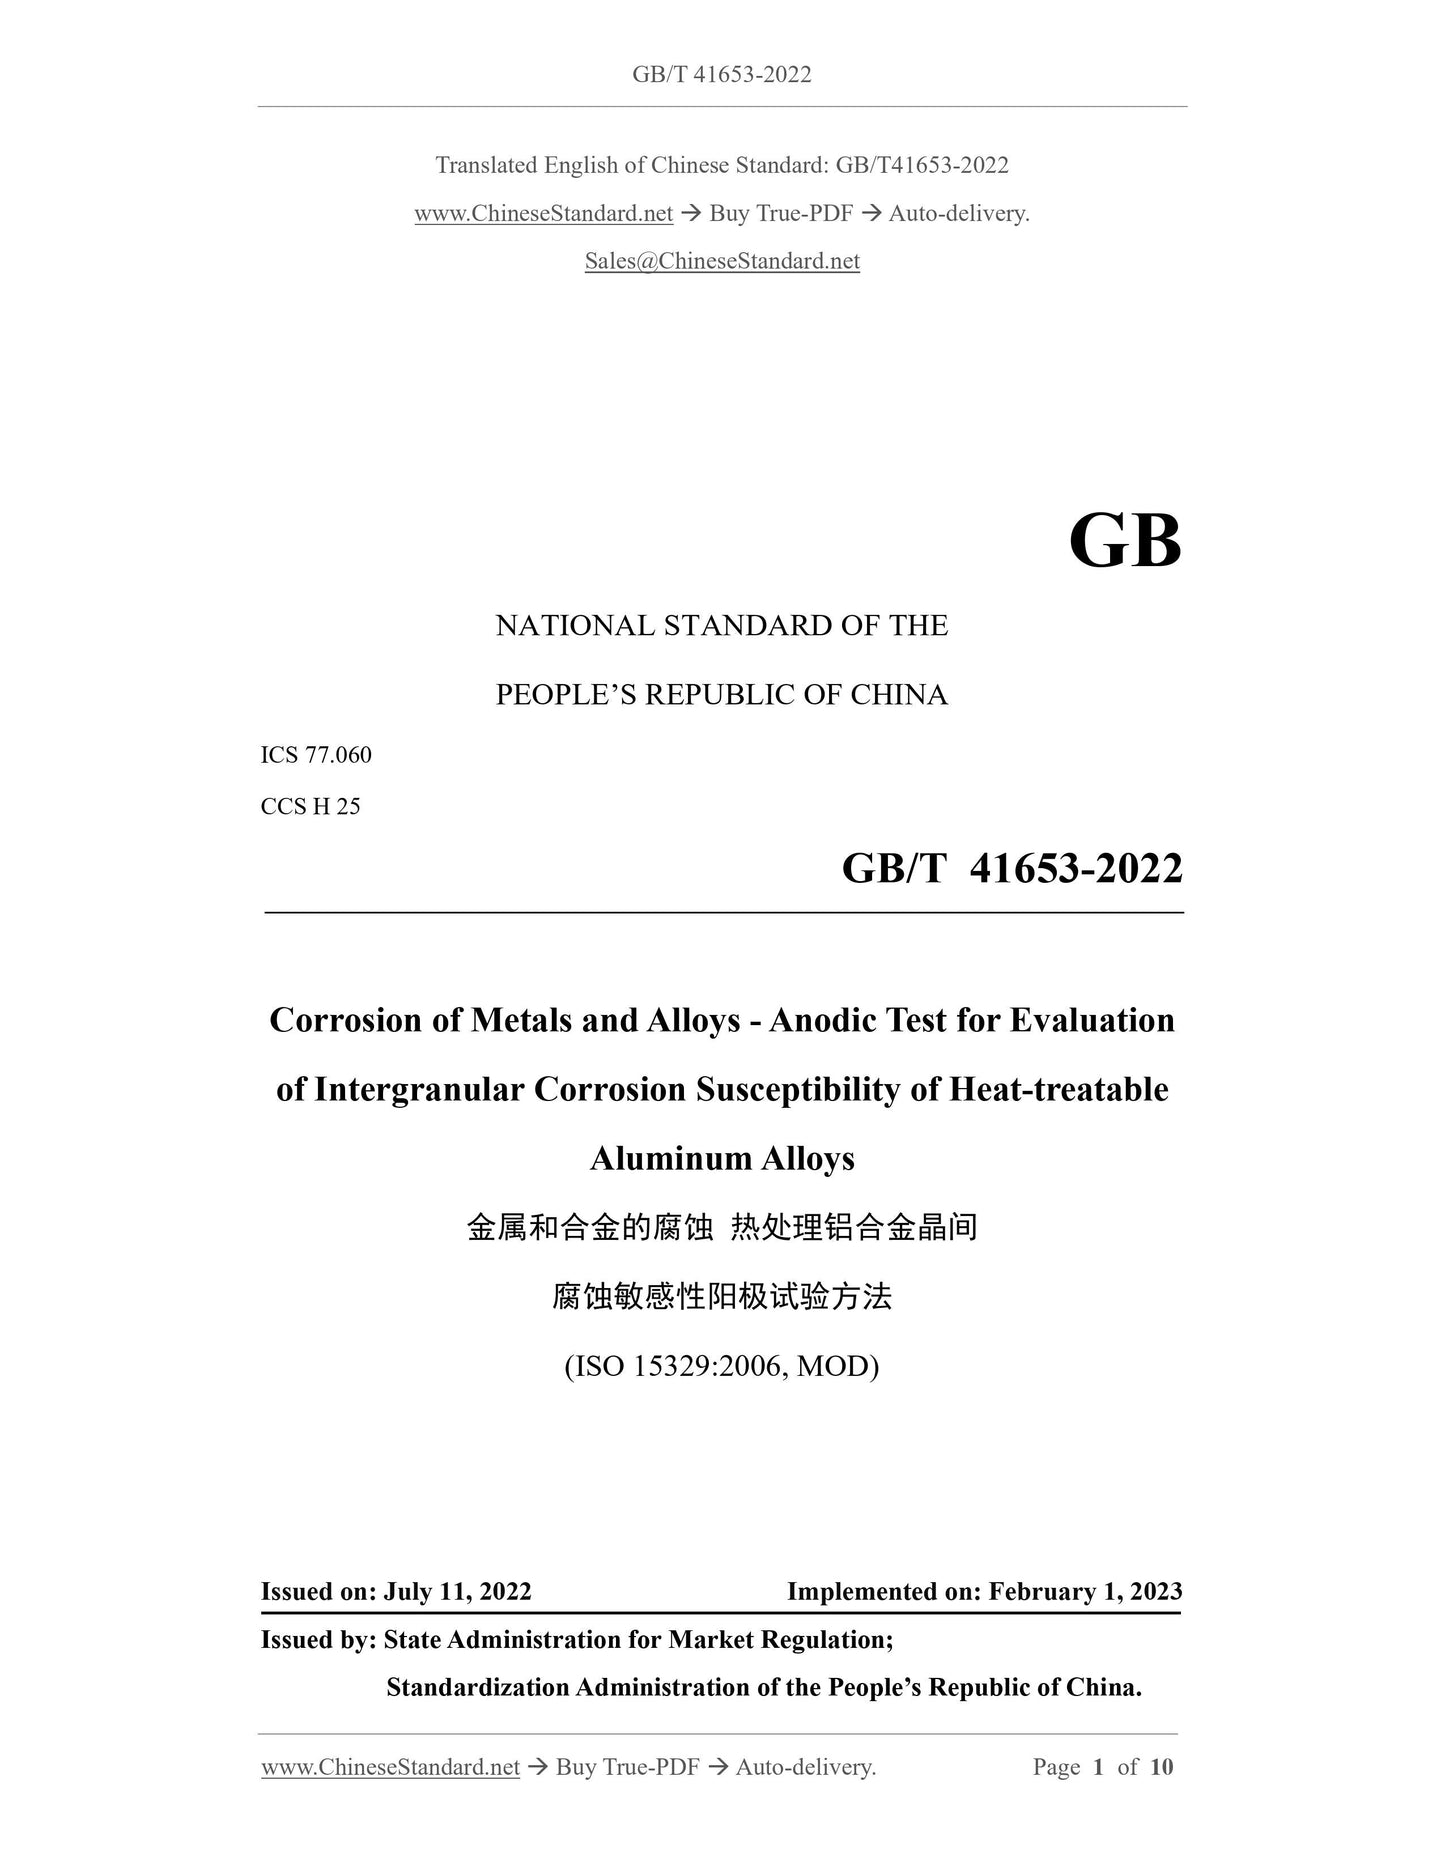 GB/T 41653-2022 Page 1